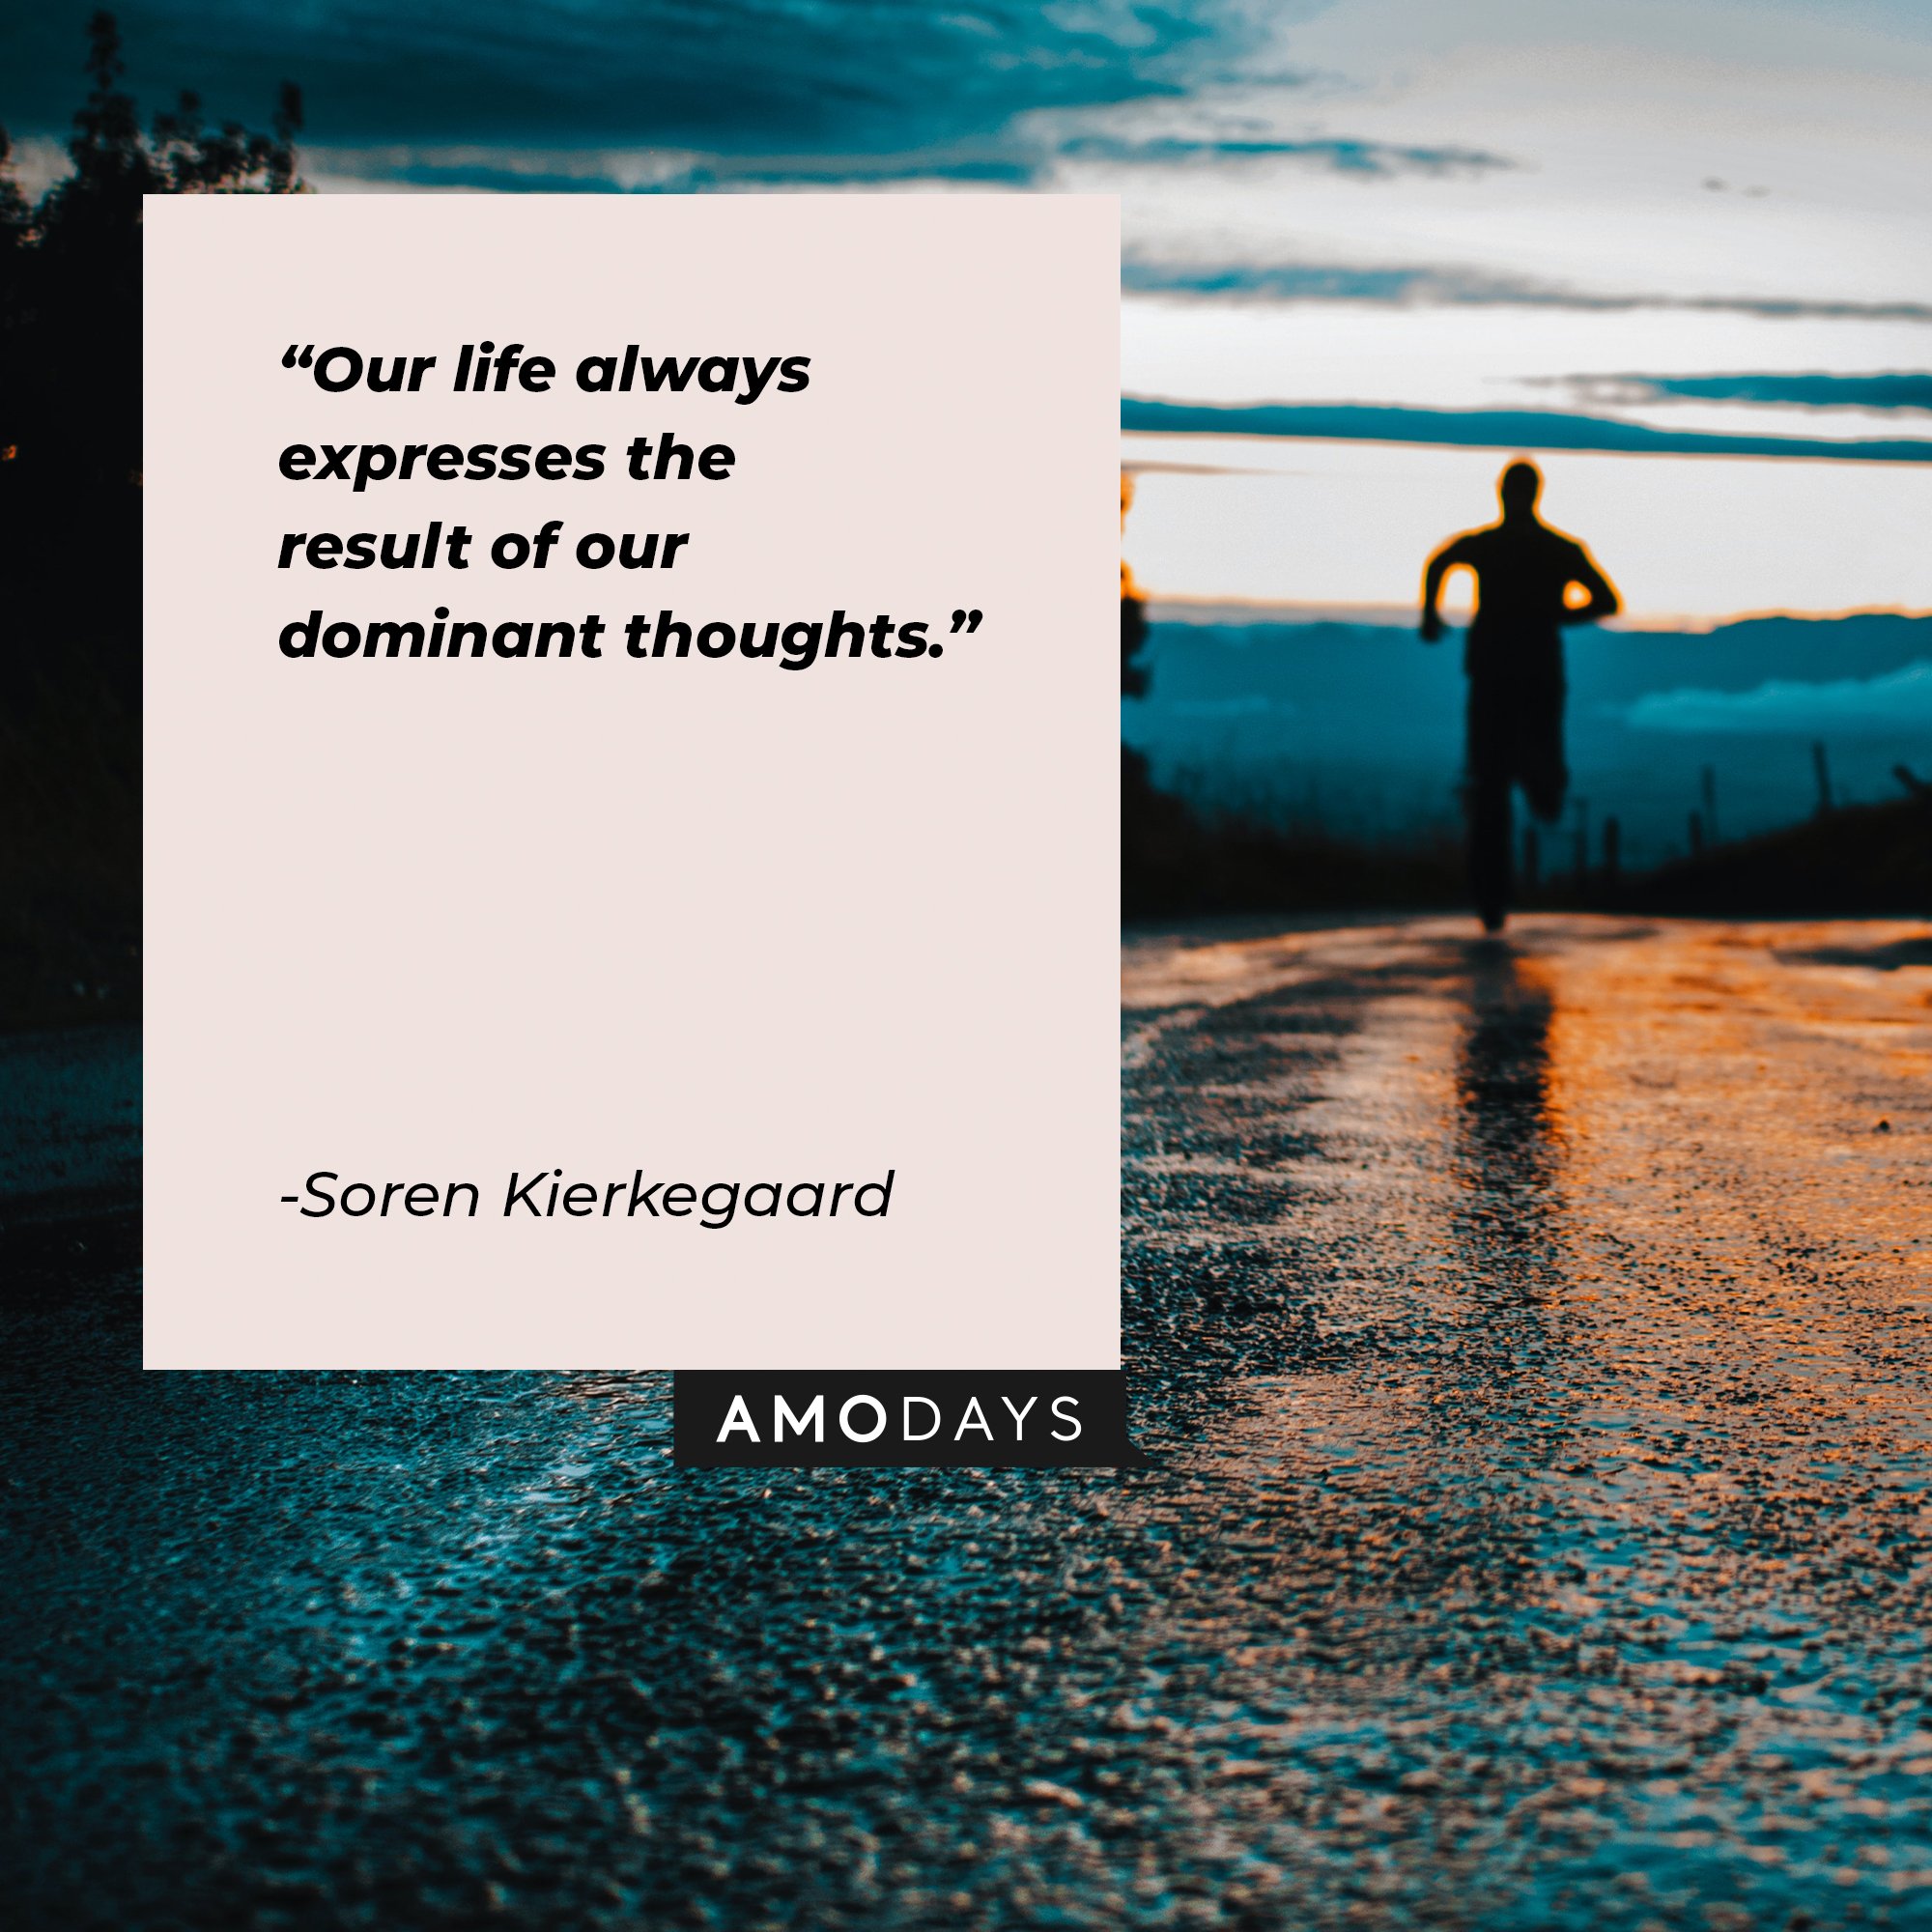 Soren Kierkegaard’s quote: "Our life always expresses the result of our dominant thoughts." | Image: AmoDays 